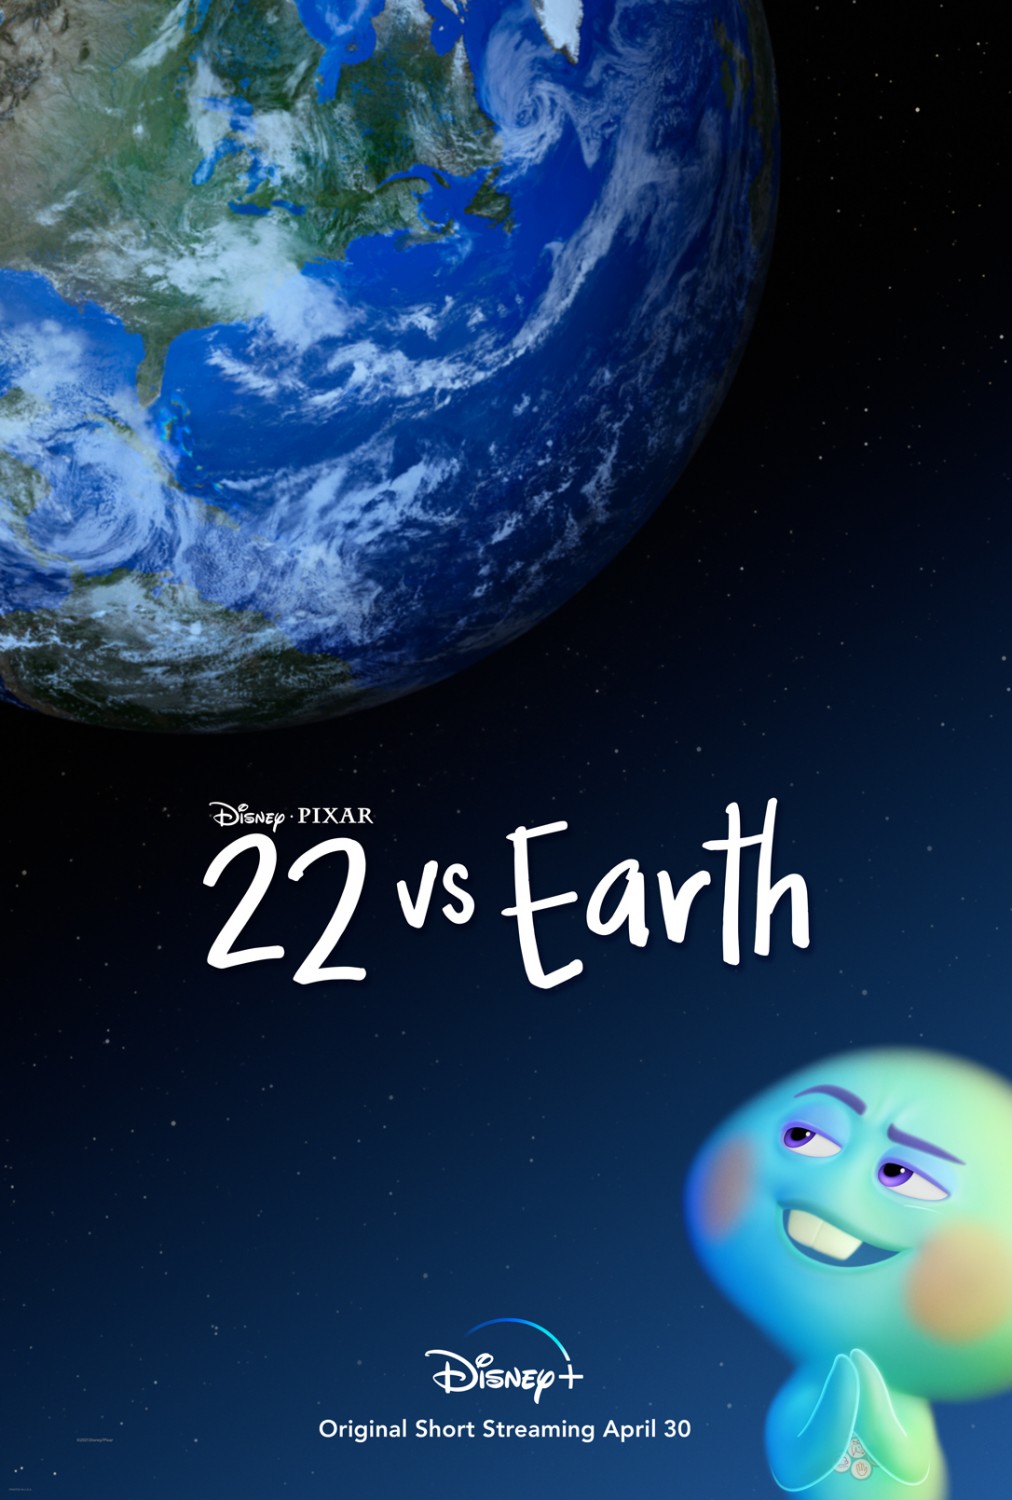 Extra Large Movie Poster Image for 22 vs. Earth